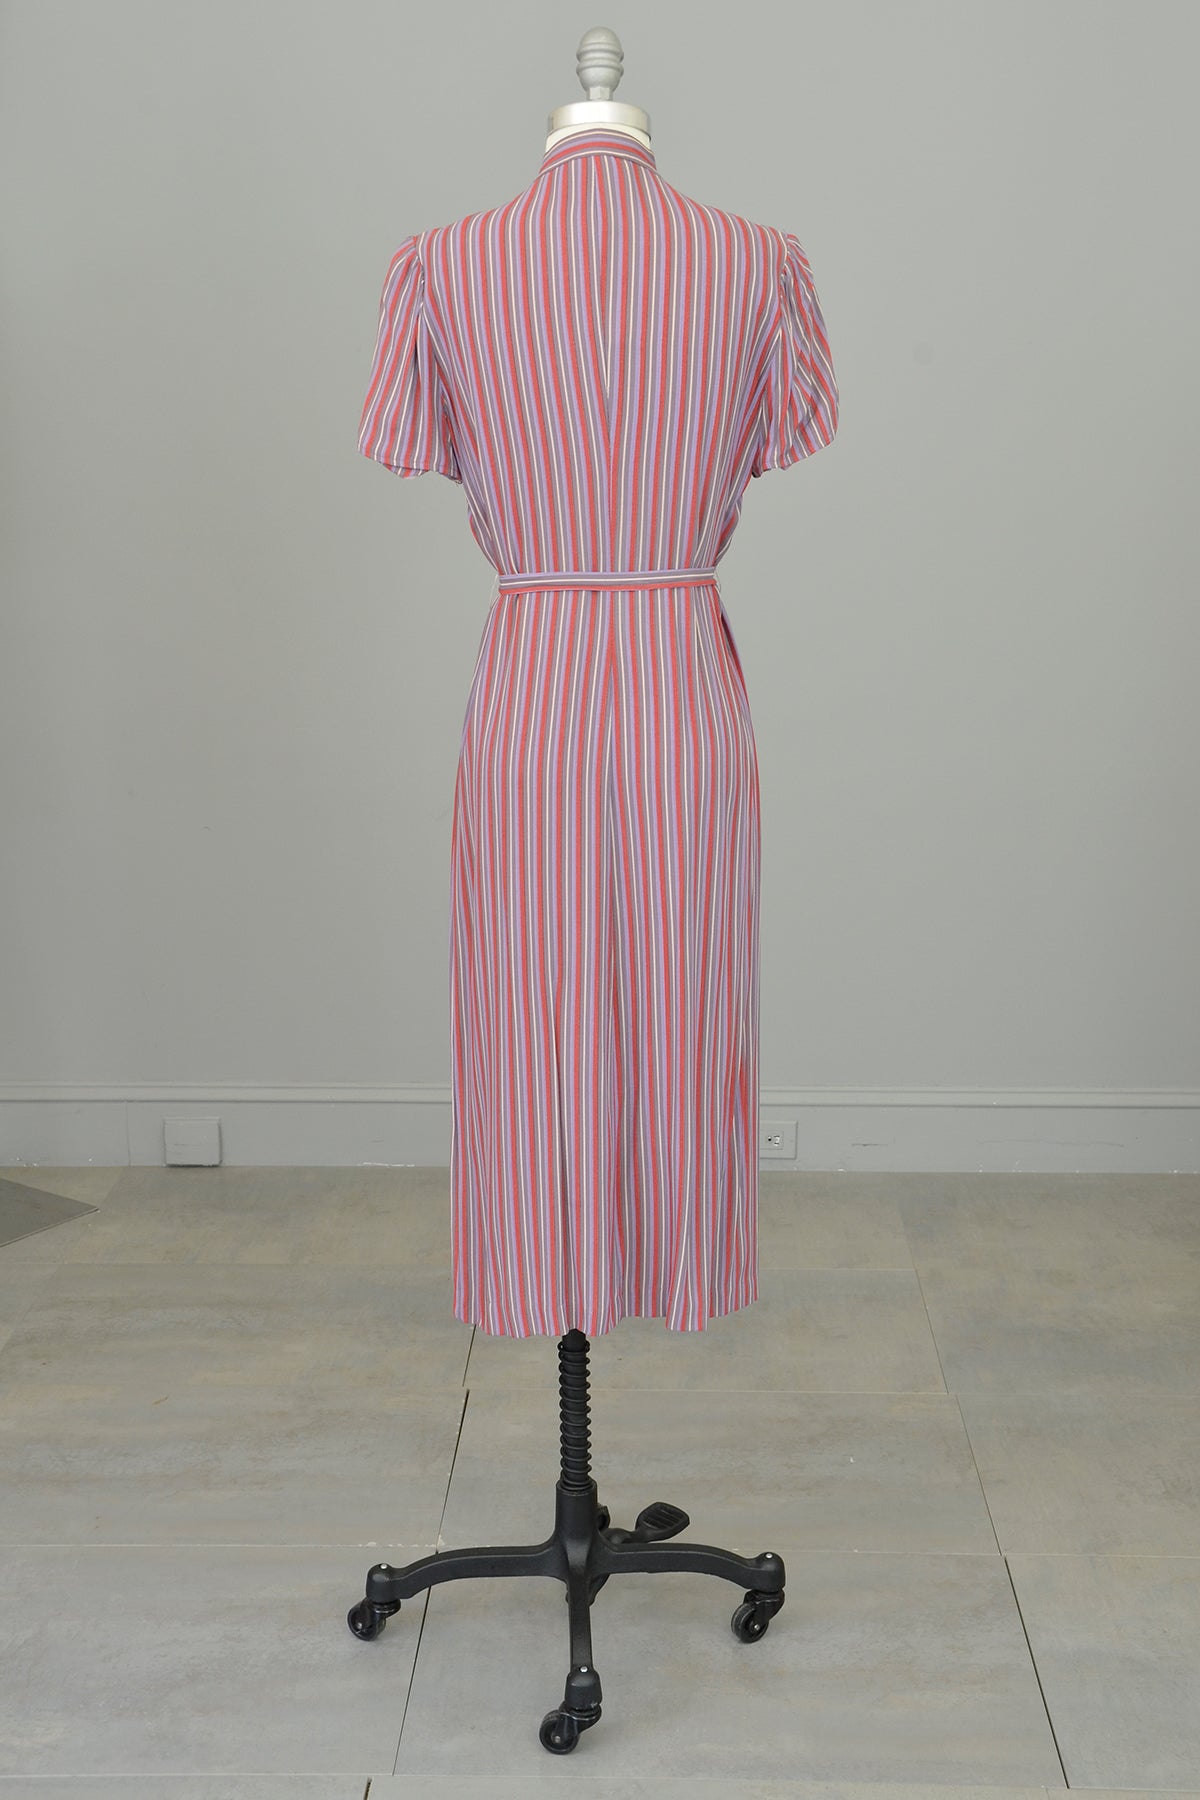 1970s Silky Striped Shift Dress with Ruffled Neckline by Belle France